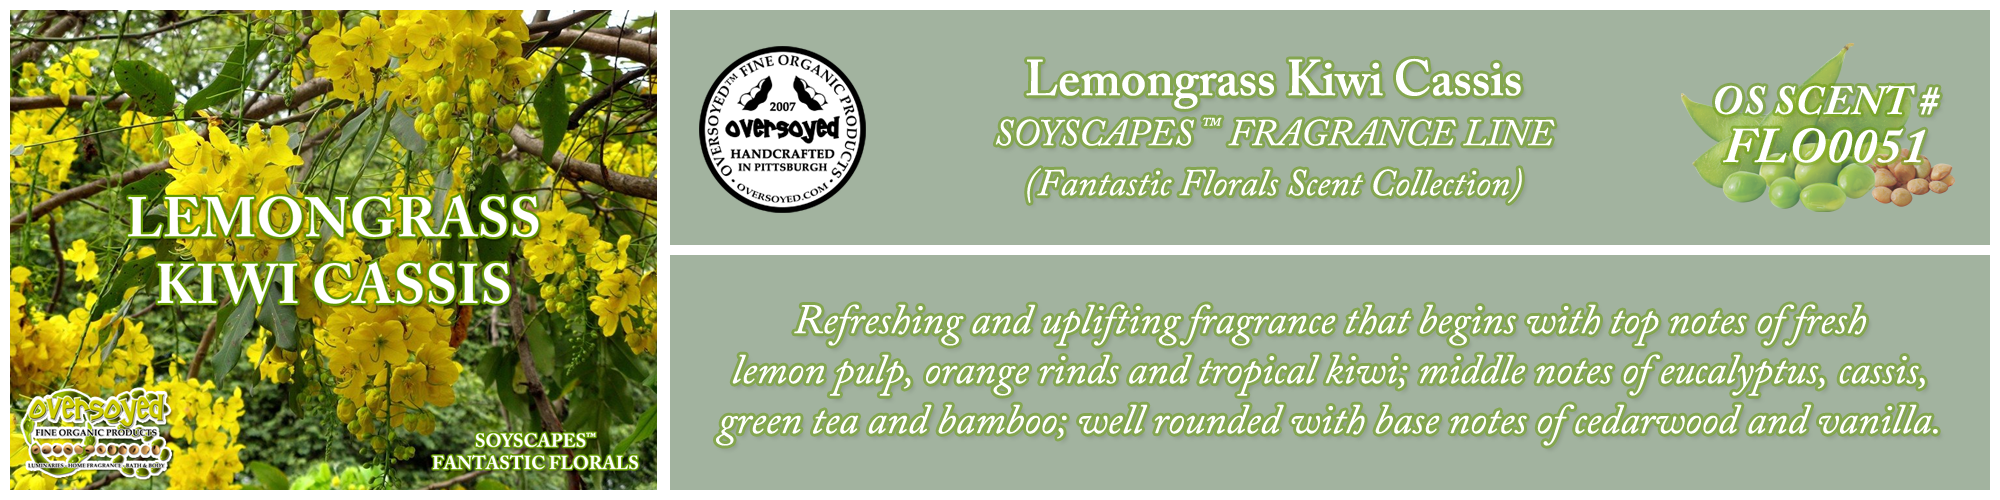 Lemongrass Kiwi Cassis Handcrafted Products Collection